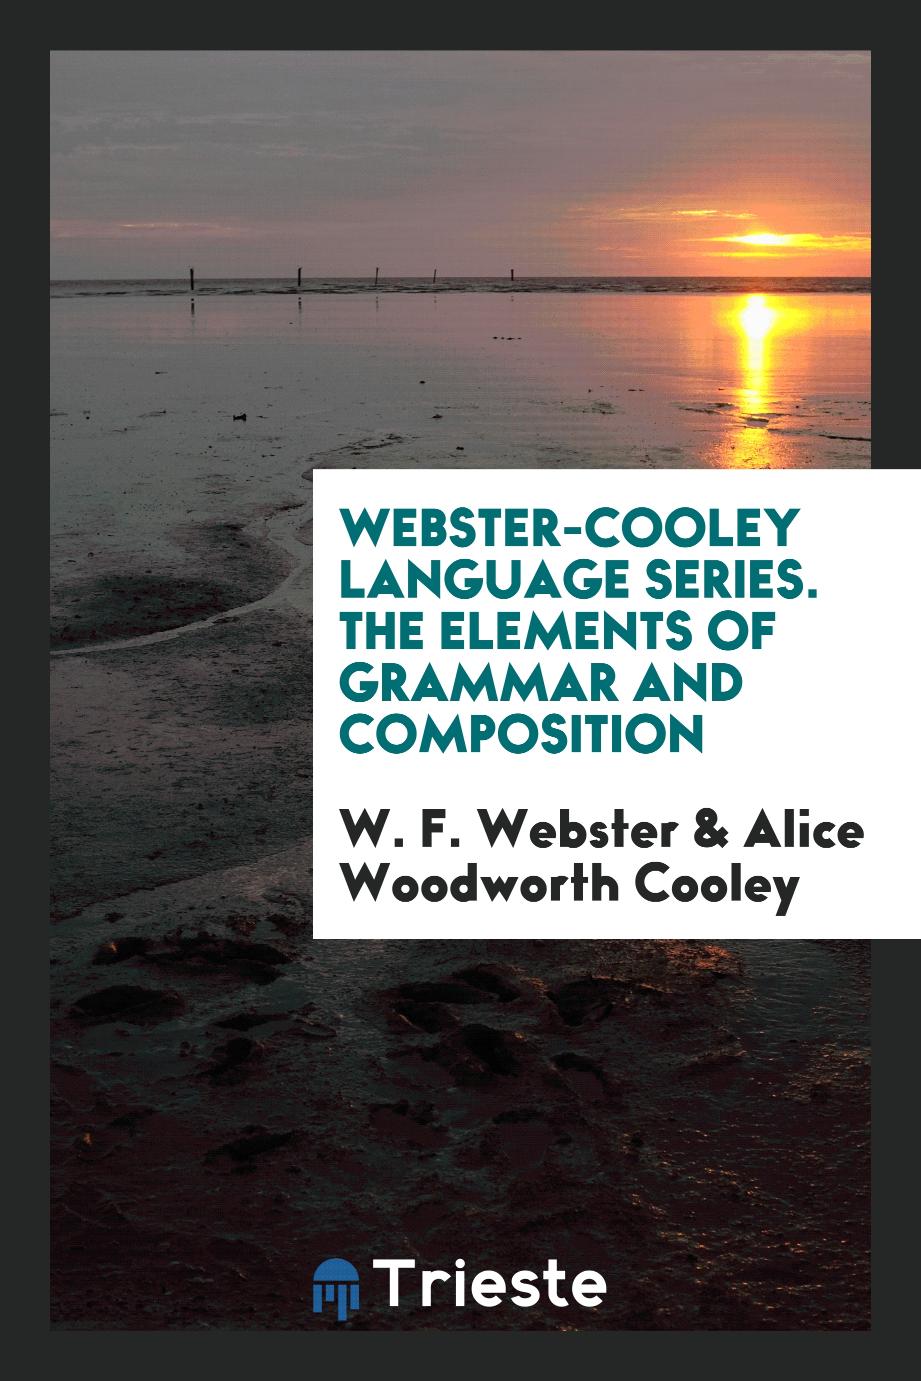 Webster-Cooley Language Series. The Elements of Grammar and Composition